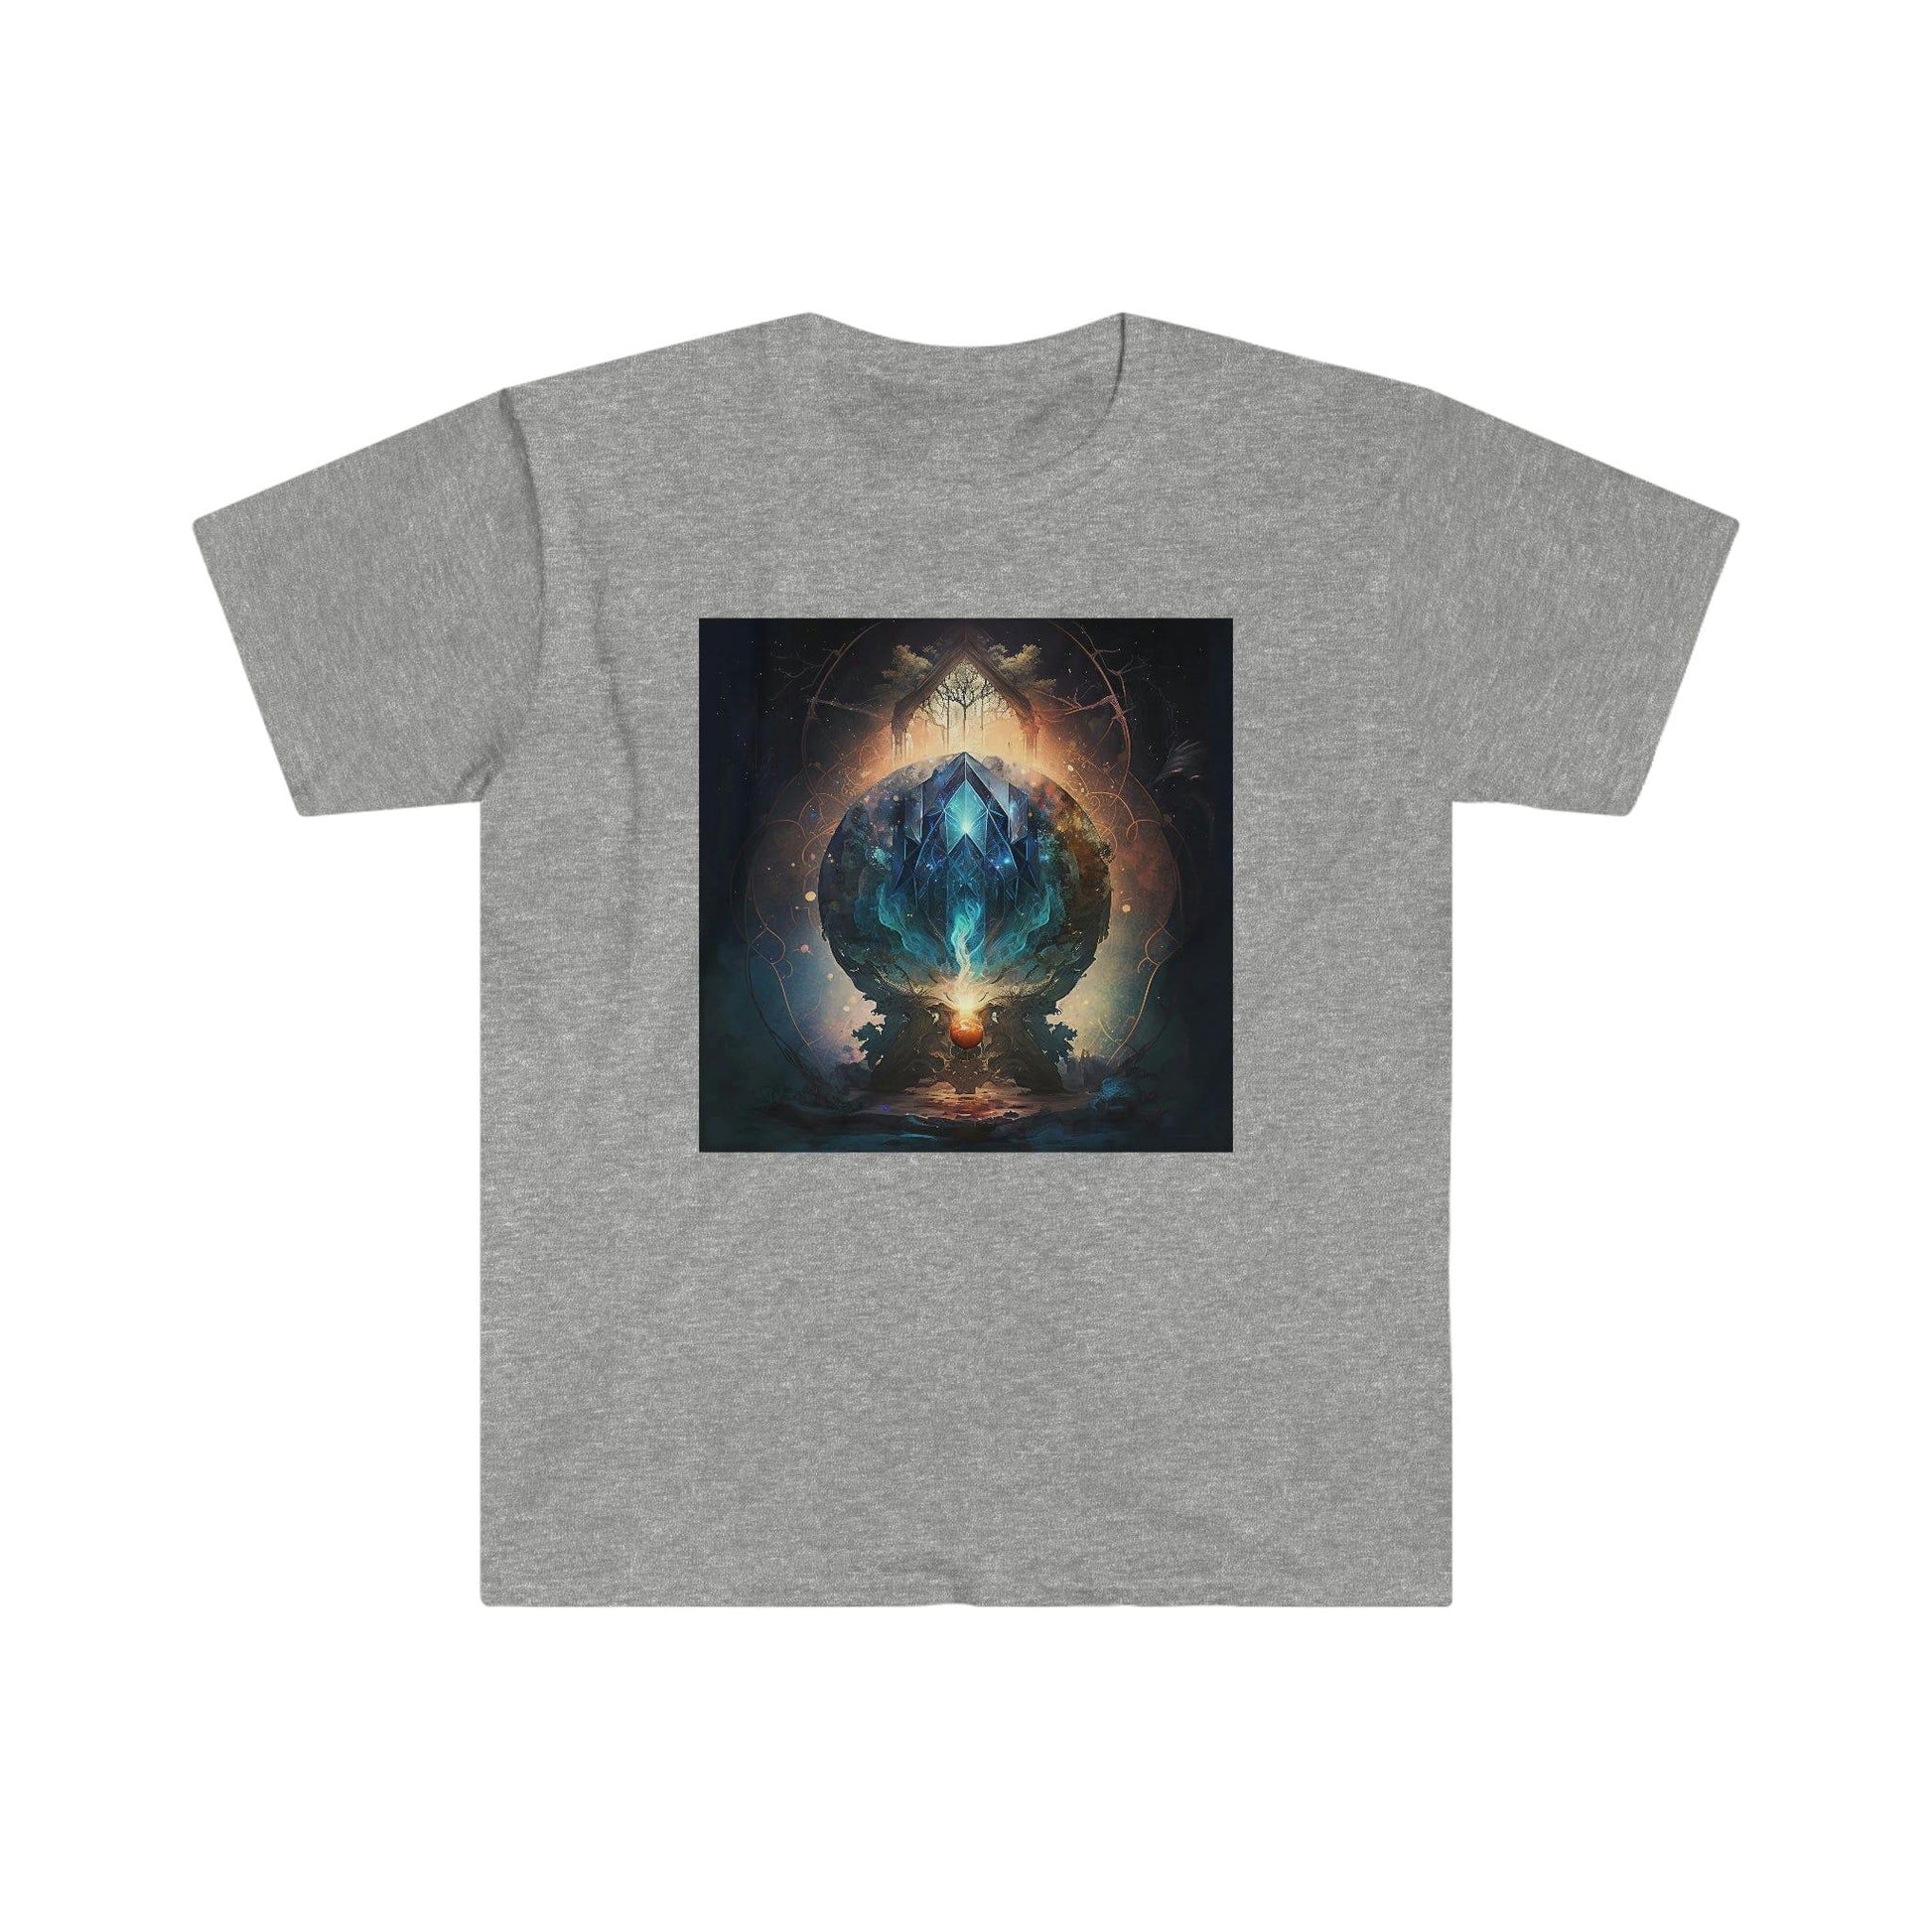 Visionary Psychedelic Ai Art Men's and Women's Unisex Soft Style T-Shirt for Festival and Street Wear Alchemystical Dream 3.0 - Alchemystics.org